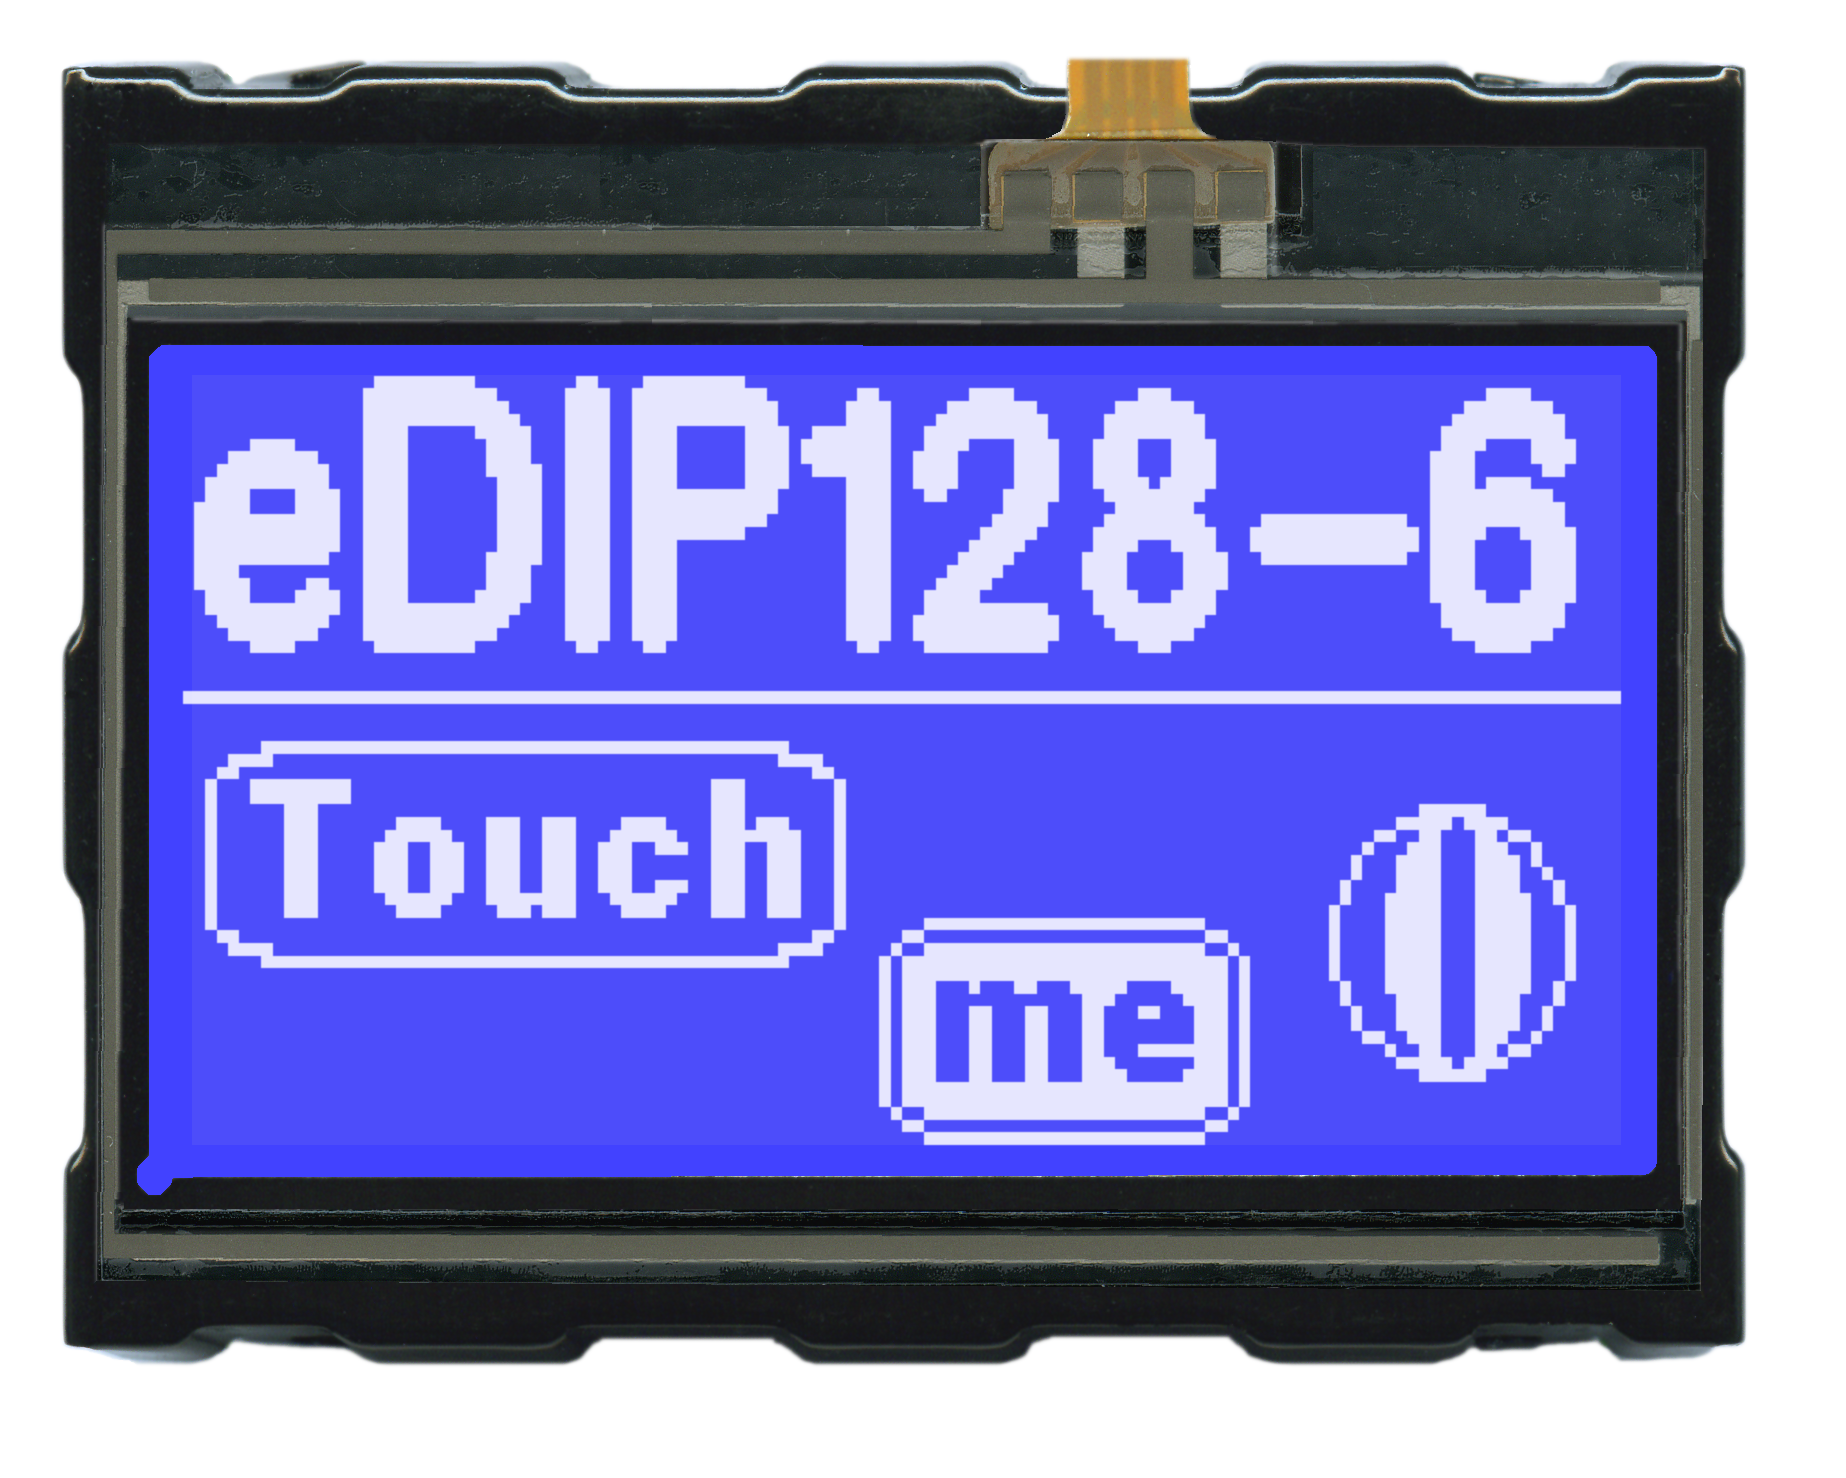 Intelligent 2.8" Graphic Display, blue/white with Touch